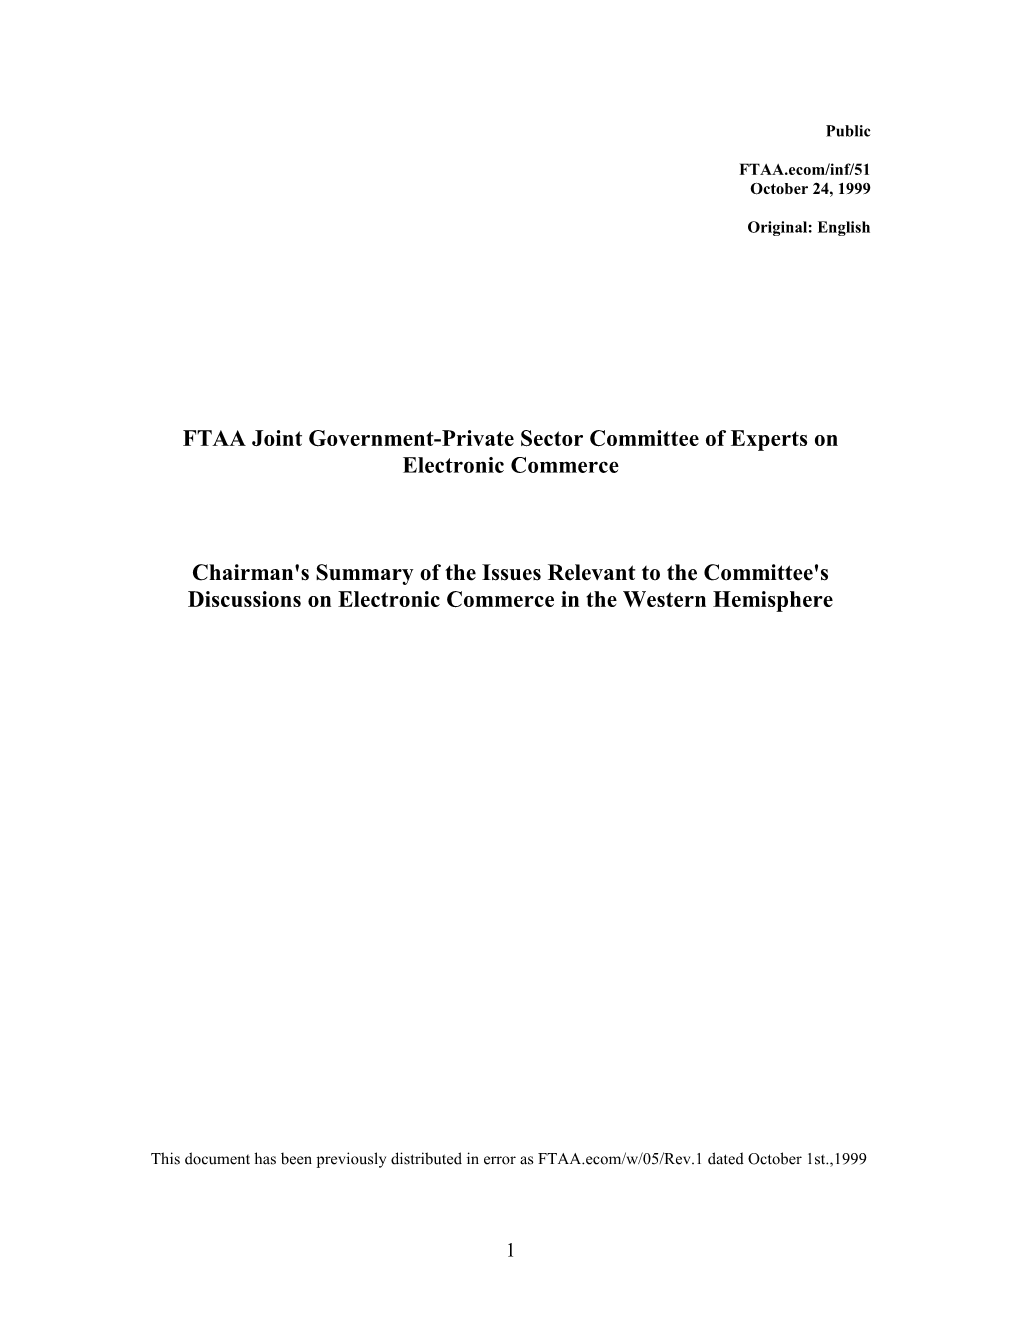 FTAA.Ecom/Inf/51 October 24, 1999 Summary of the Issues Relevant to the Committee's Discussions